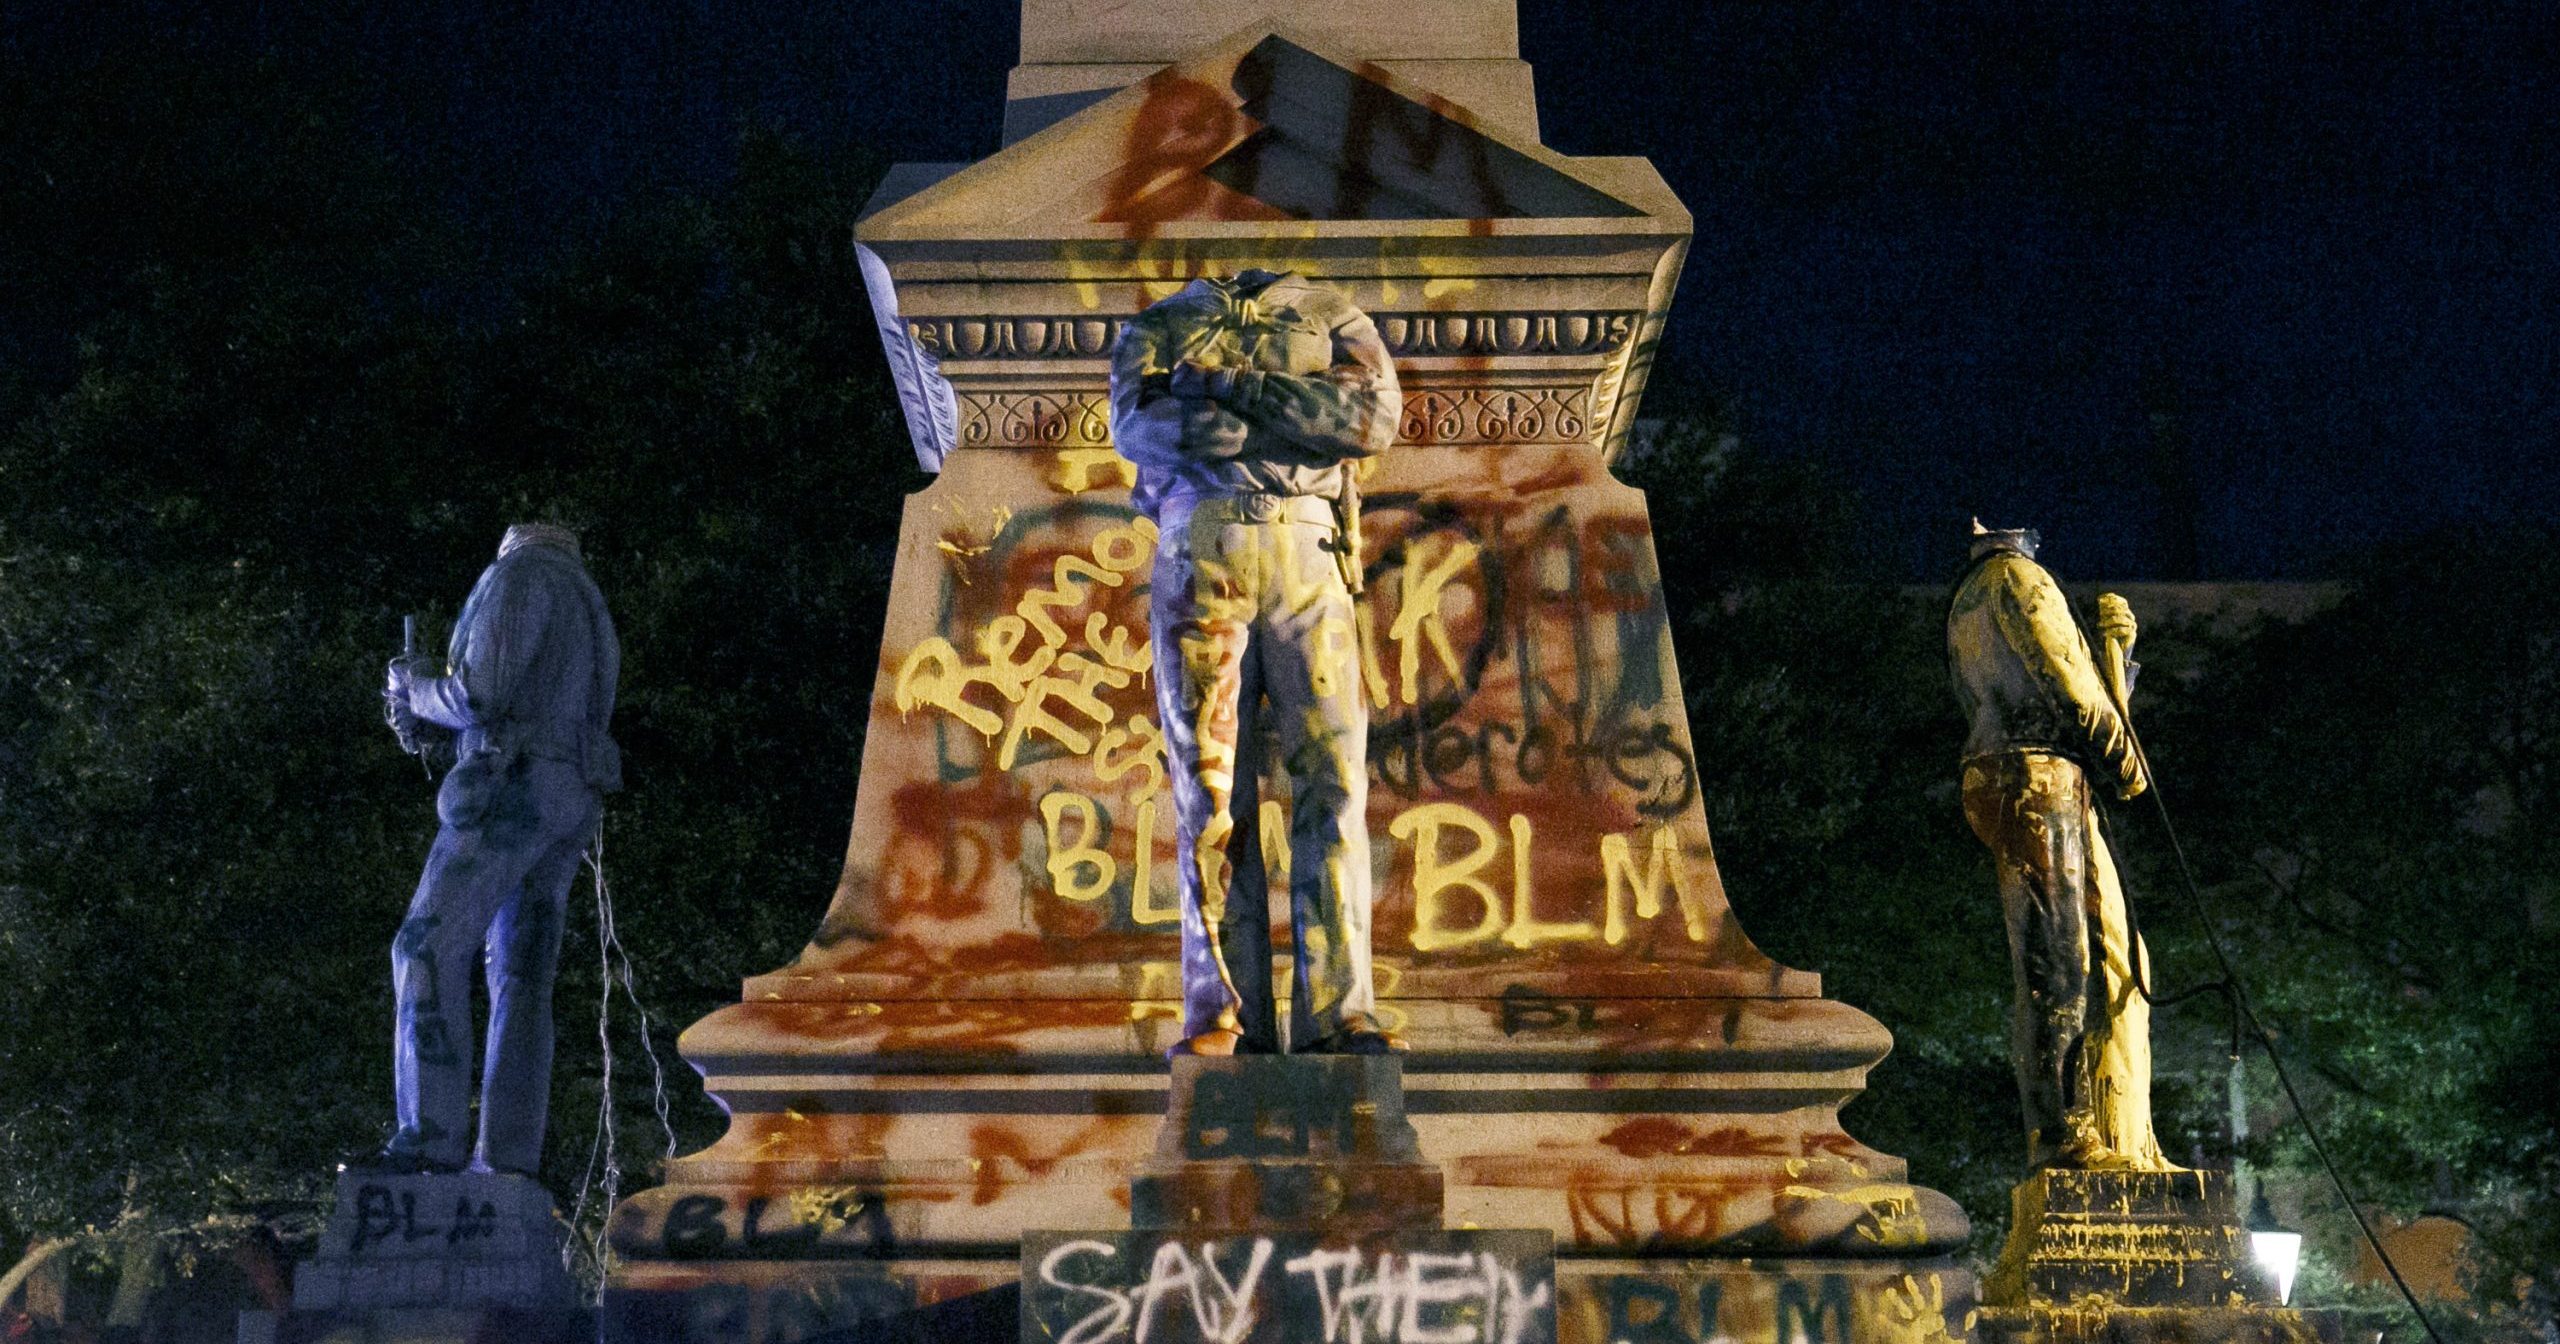 Statues on a Confederate monument are covered in graffiti and beheaded after a protest in Portsmouth, Virginia, on June 10, 2020.